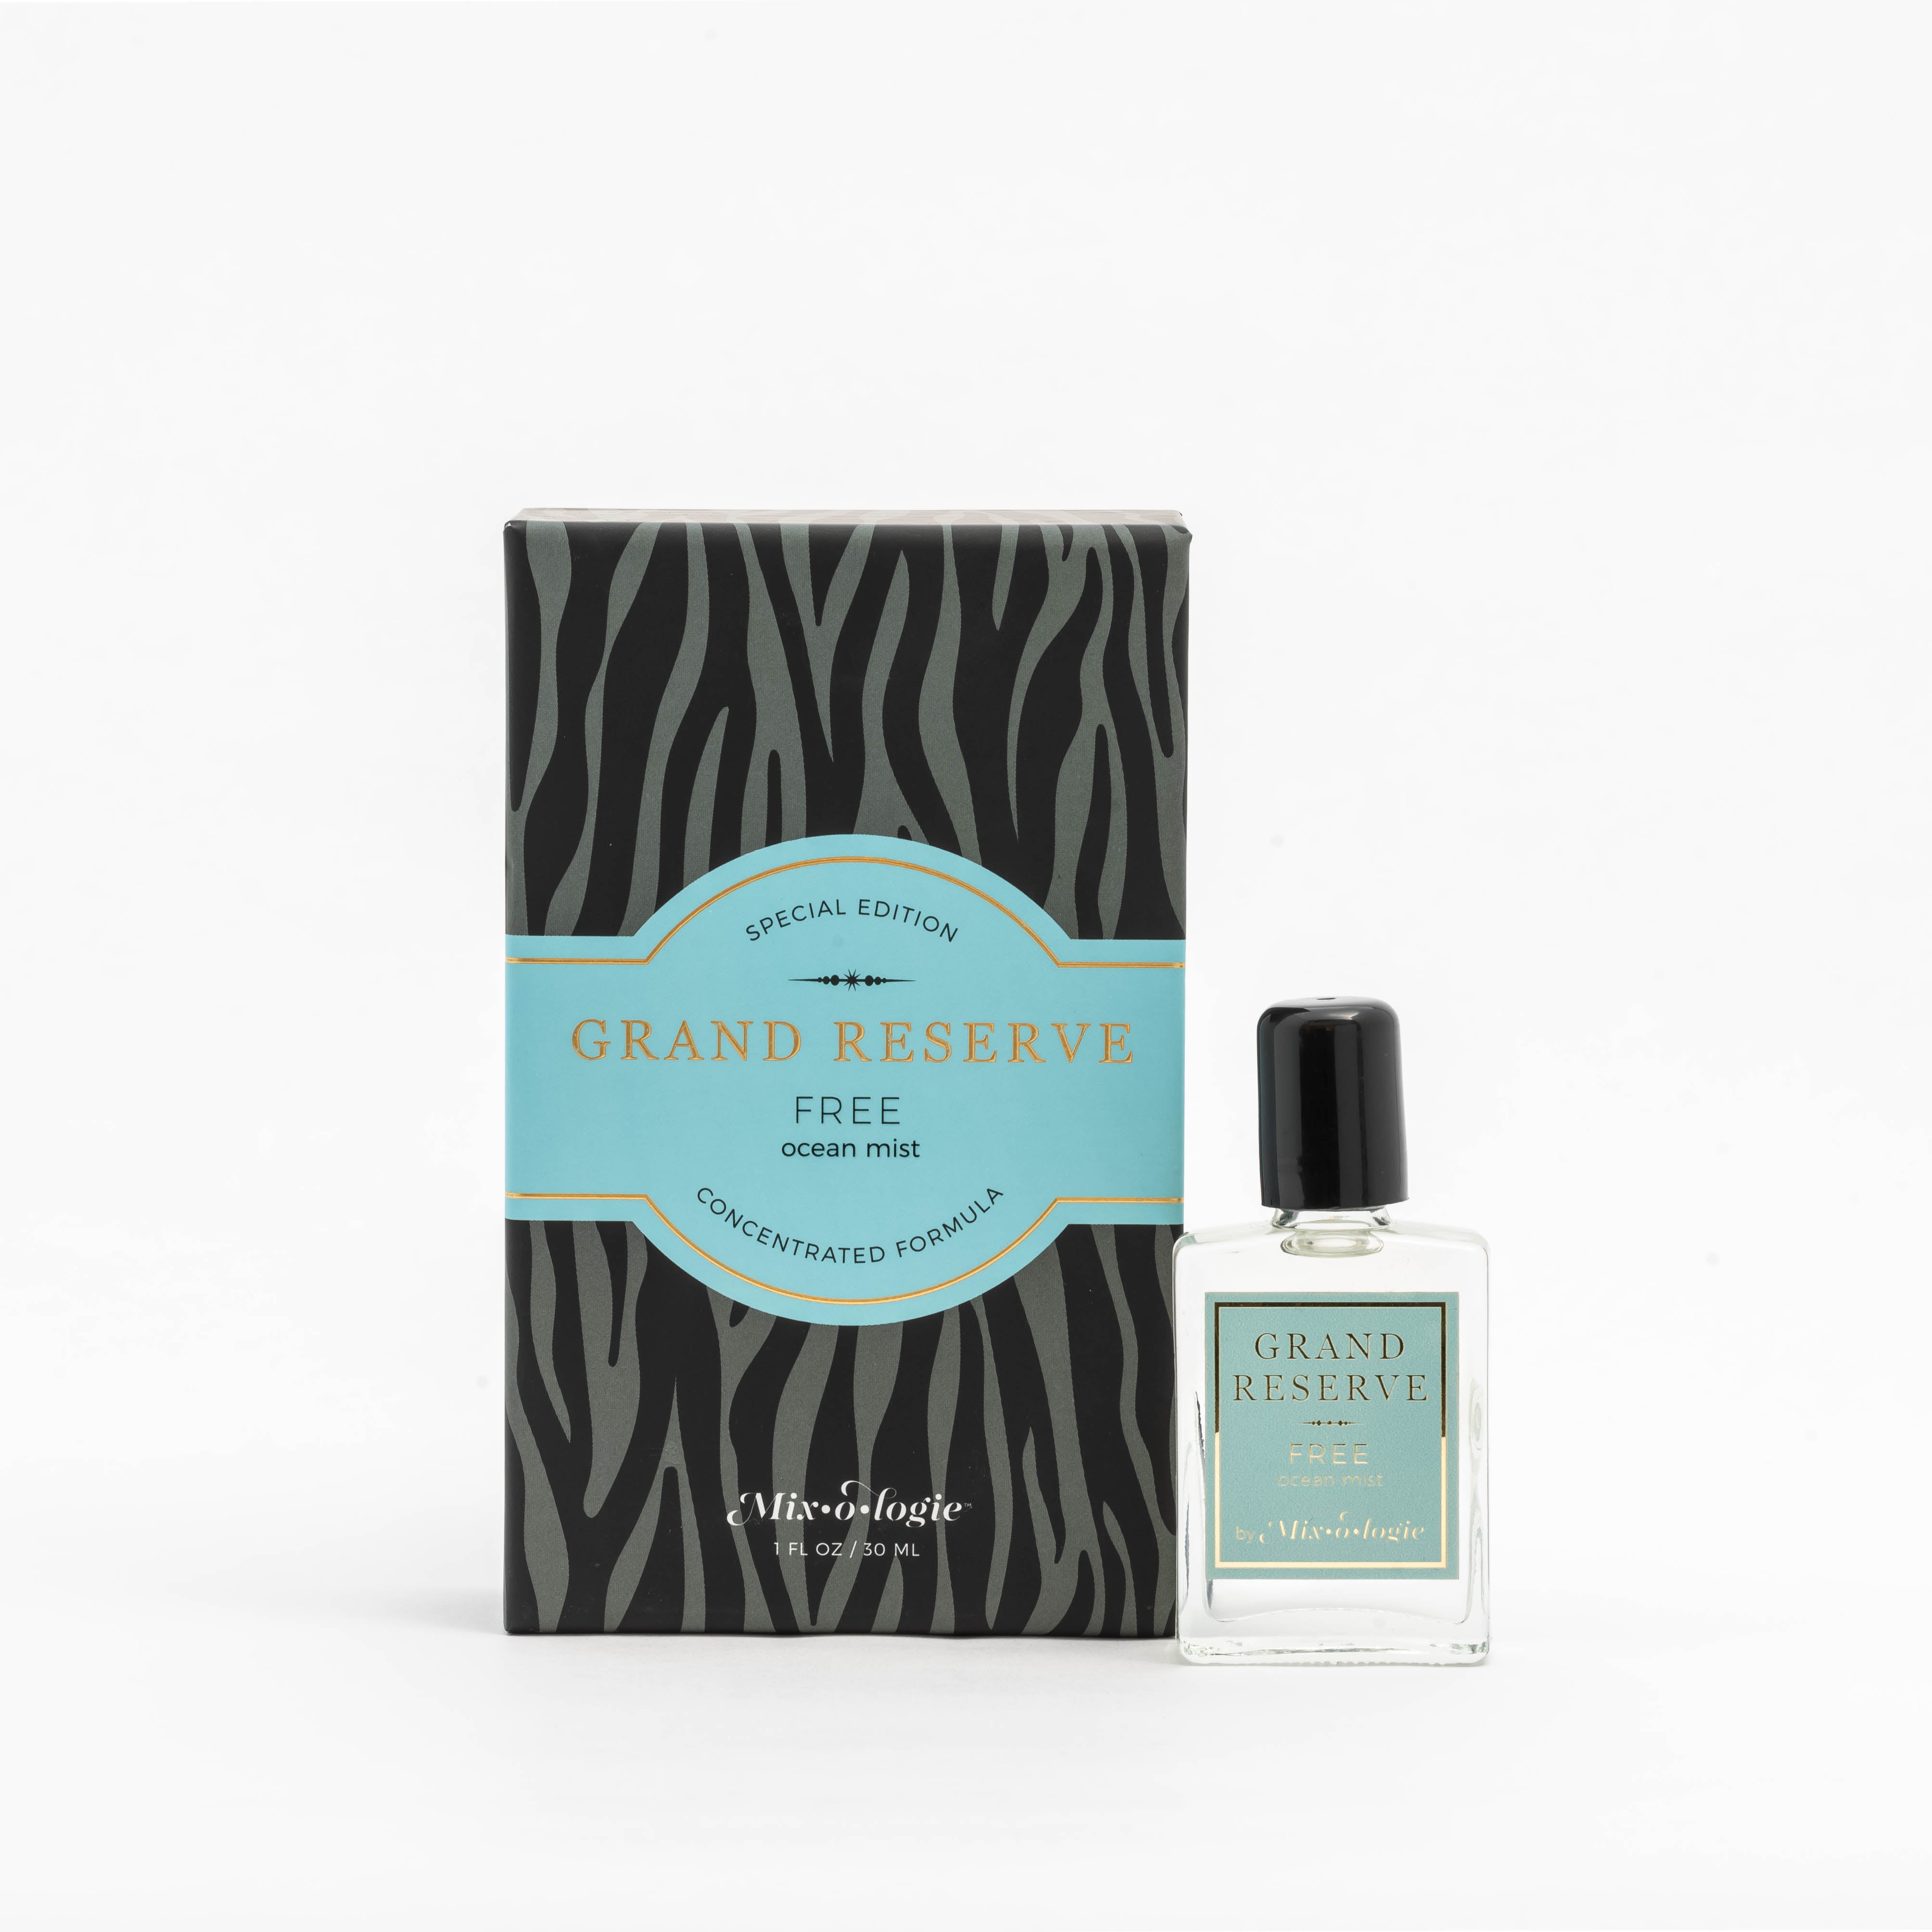 Free (Ocean Mist) Special Edition Grand Reserve concentrated formula in clear glass rectangle perfume bottle that has 1 fl oz or 30 mL of clear liquid with black cap, label, and spray nozzle. Black zebra pattern rectangle box with pale blue letting. Grand Reserve and box pictured with white background.